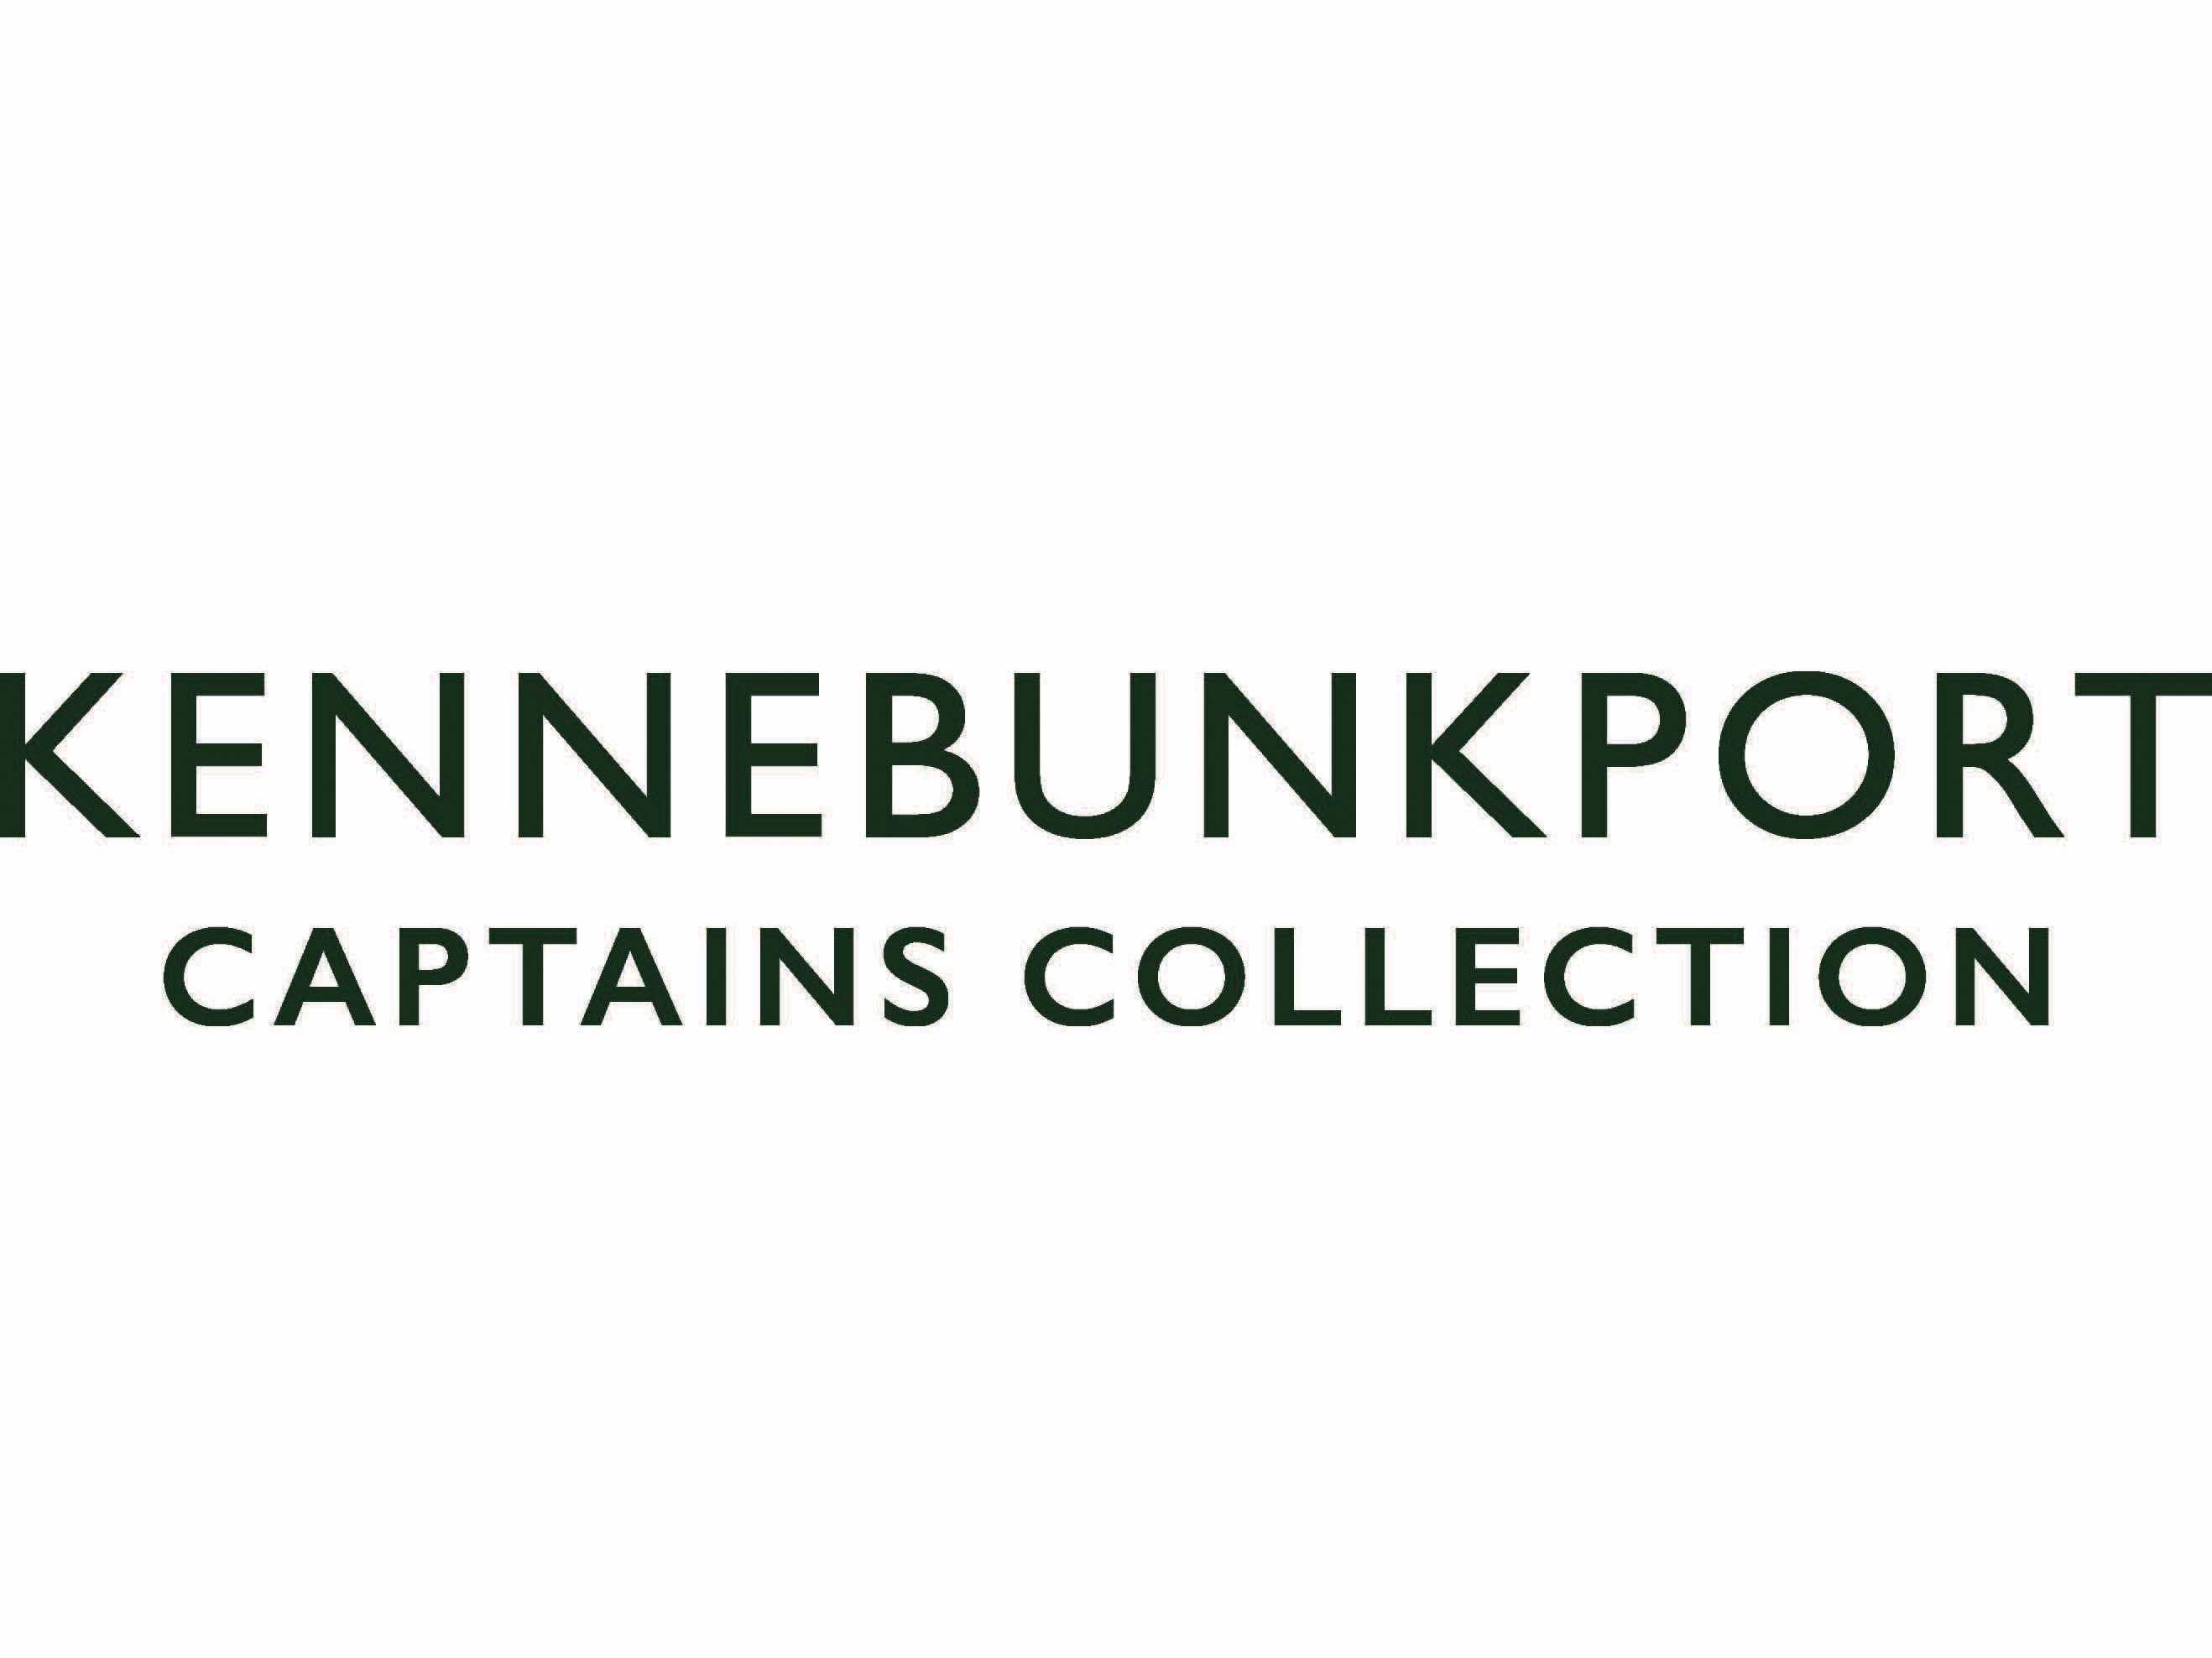 Kennebunkport Captains Collection